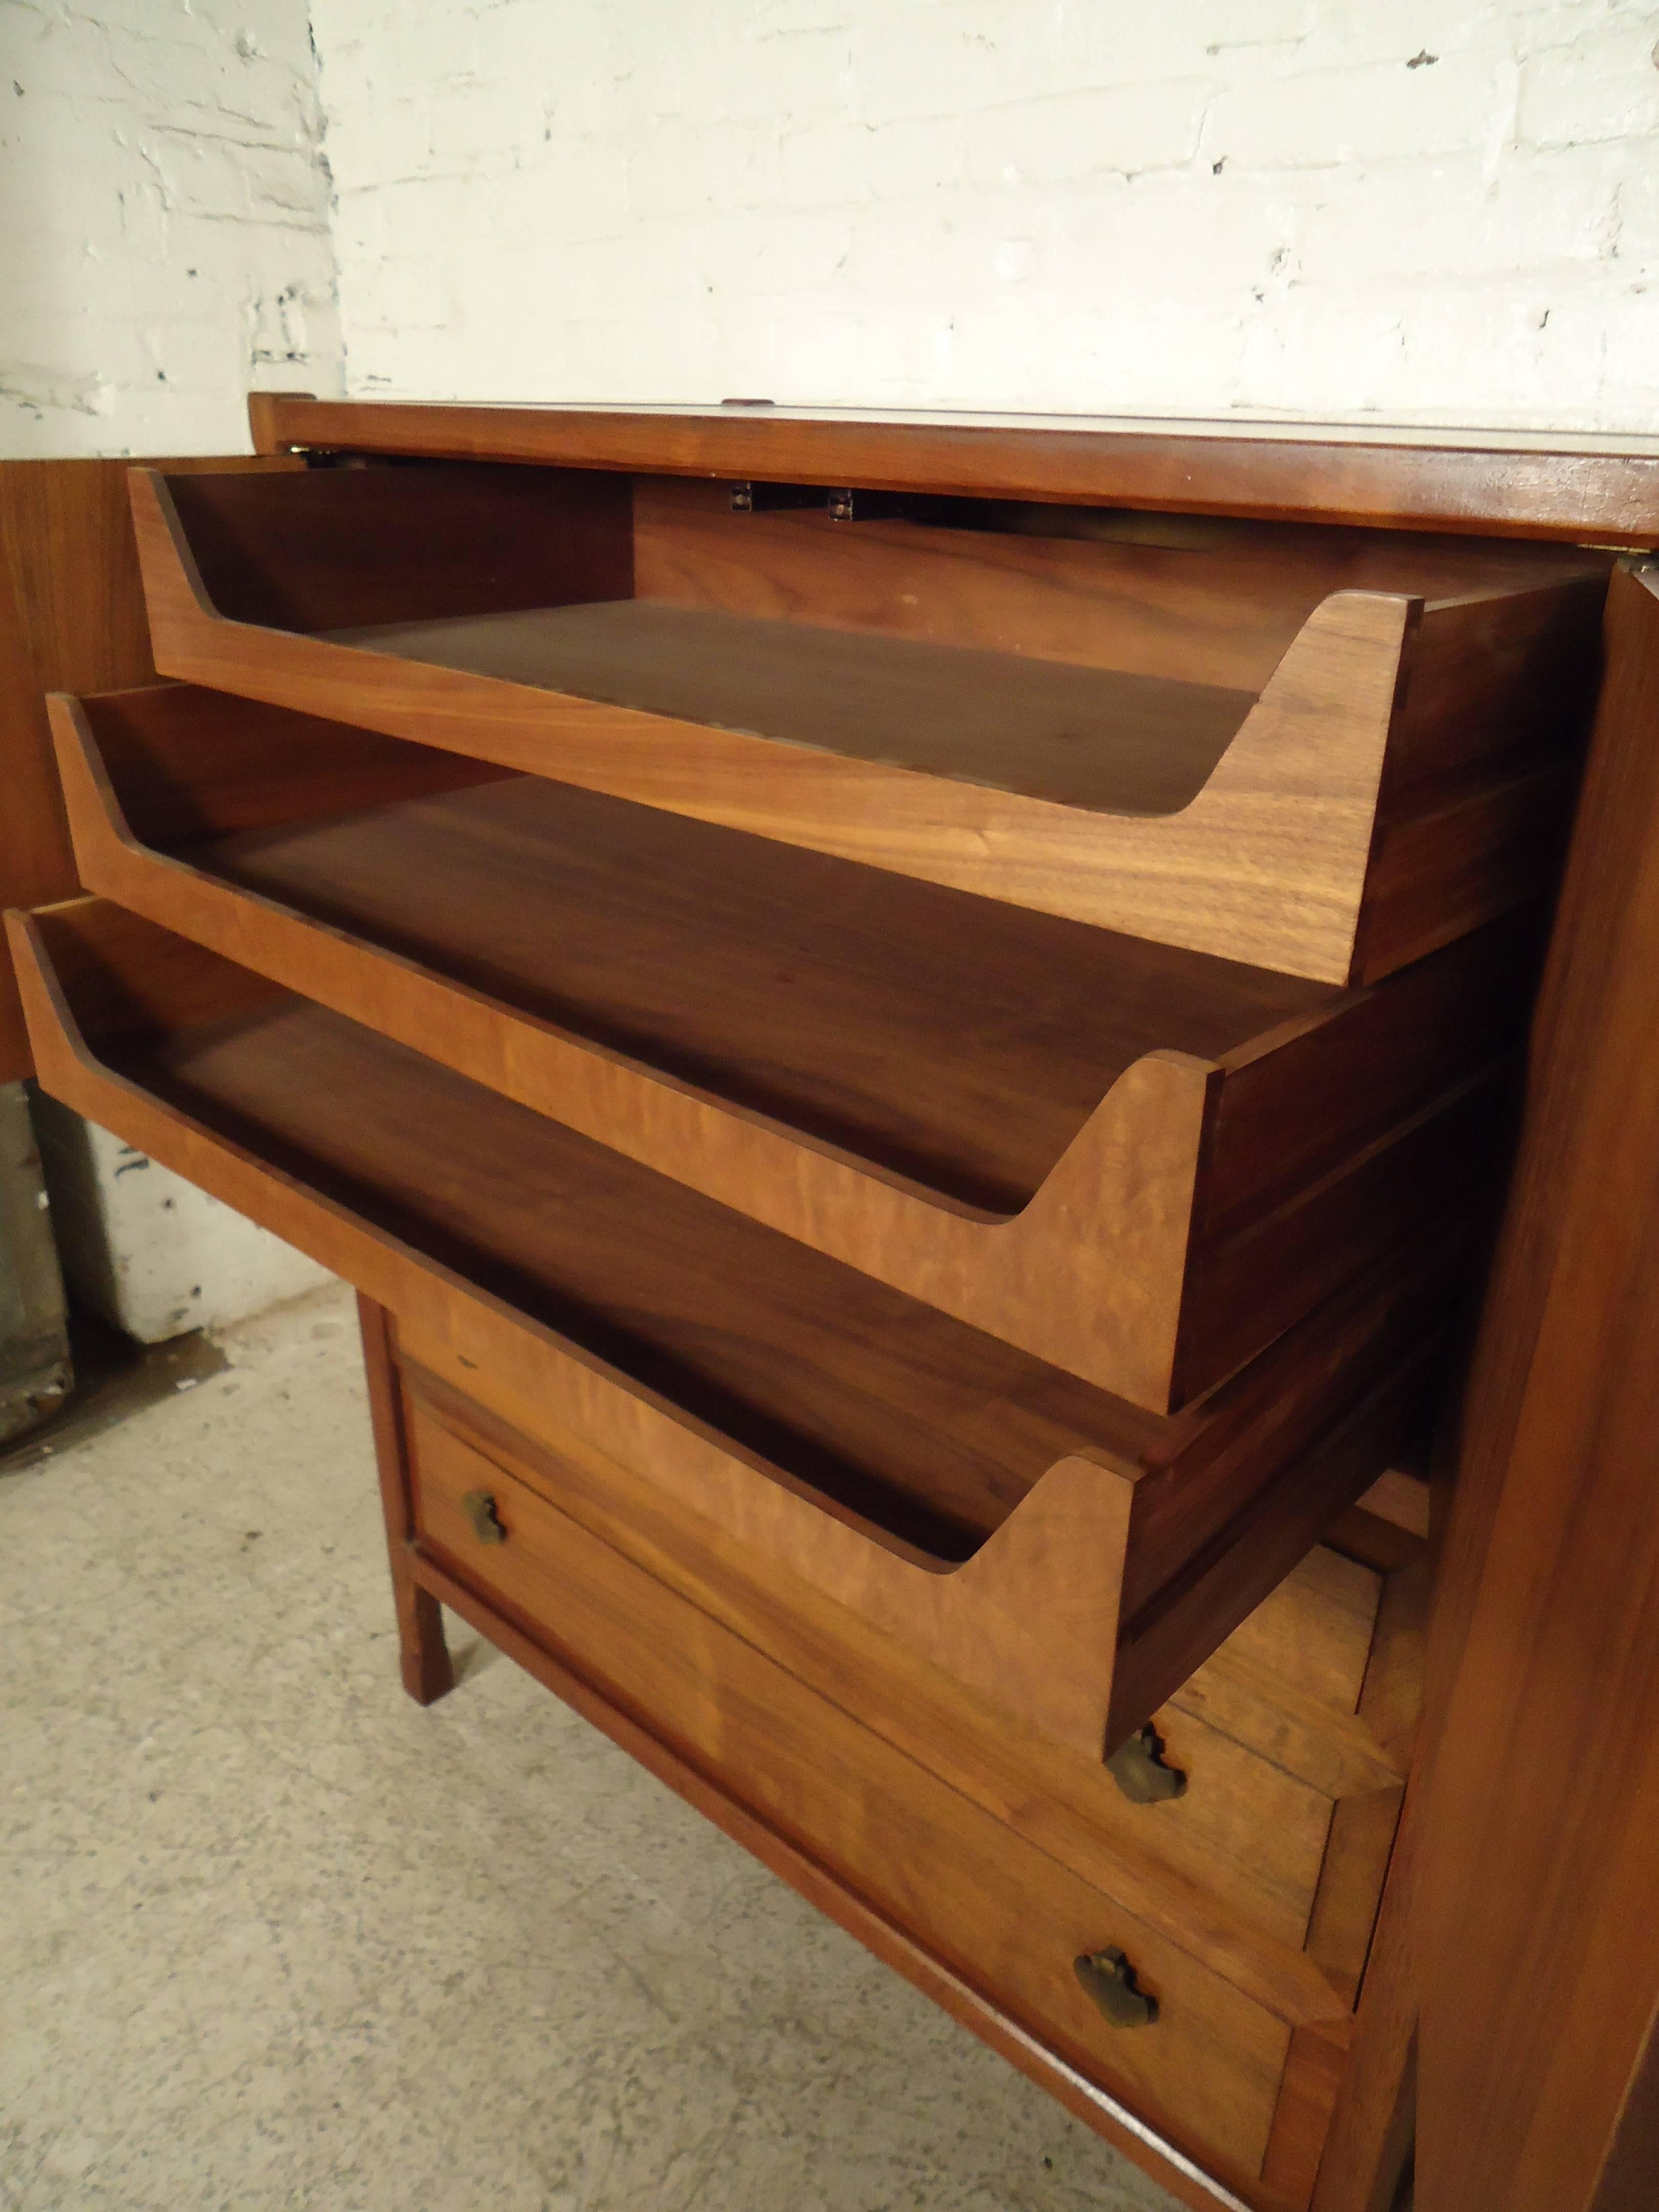 Handsome dresser by Widdicomb with walnut grain, six total drawers, brass spade handles. Back has a finished wood panel.

(Please confirm item location-NY or NJ-with dealer).
     